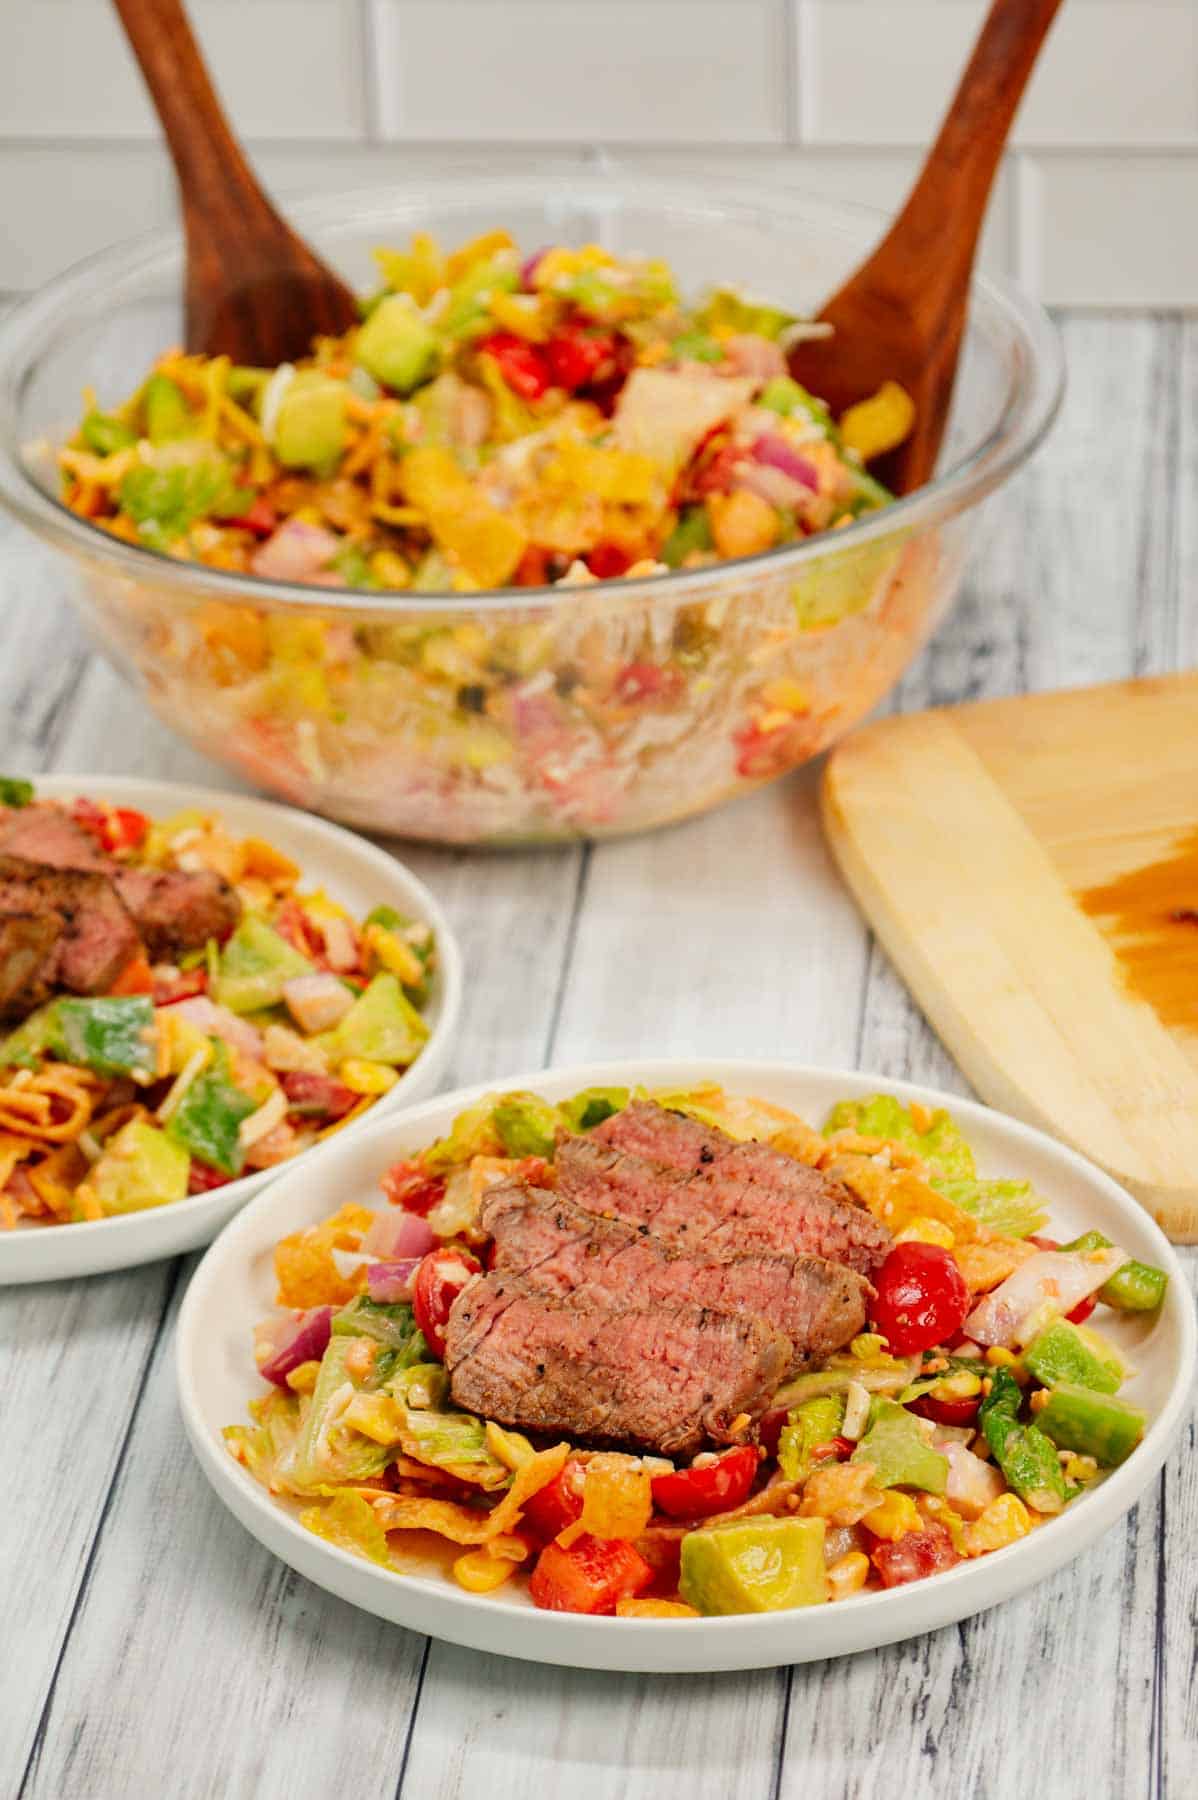 Steak Taco Salad is a delicious dinner recipe loaded with romaine lettuce, red onions, red bell peppers, green bell peppers, grape tomatoes, corn, shredded cheese, chunky salsa, ranch dressing, diced avocado, Fritos corn chips and sliced eye of round steaks.